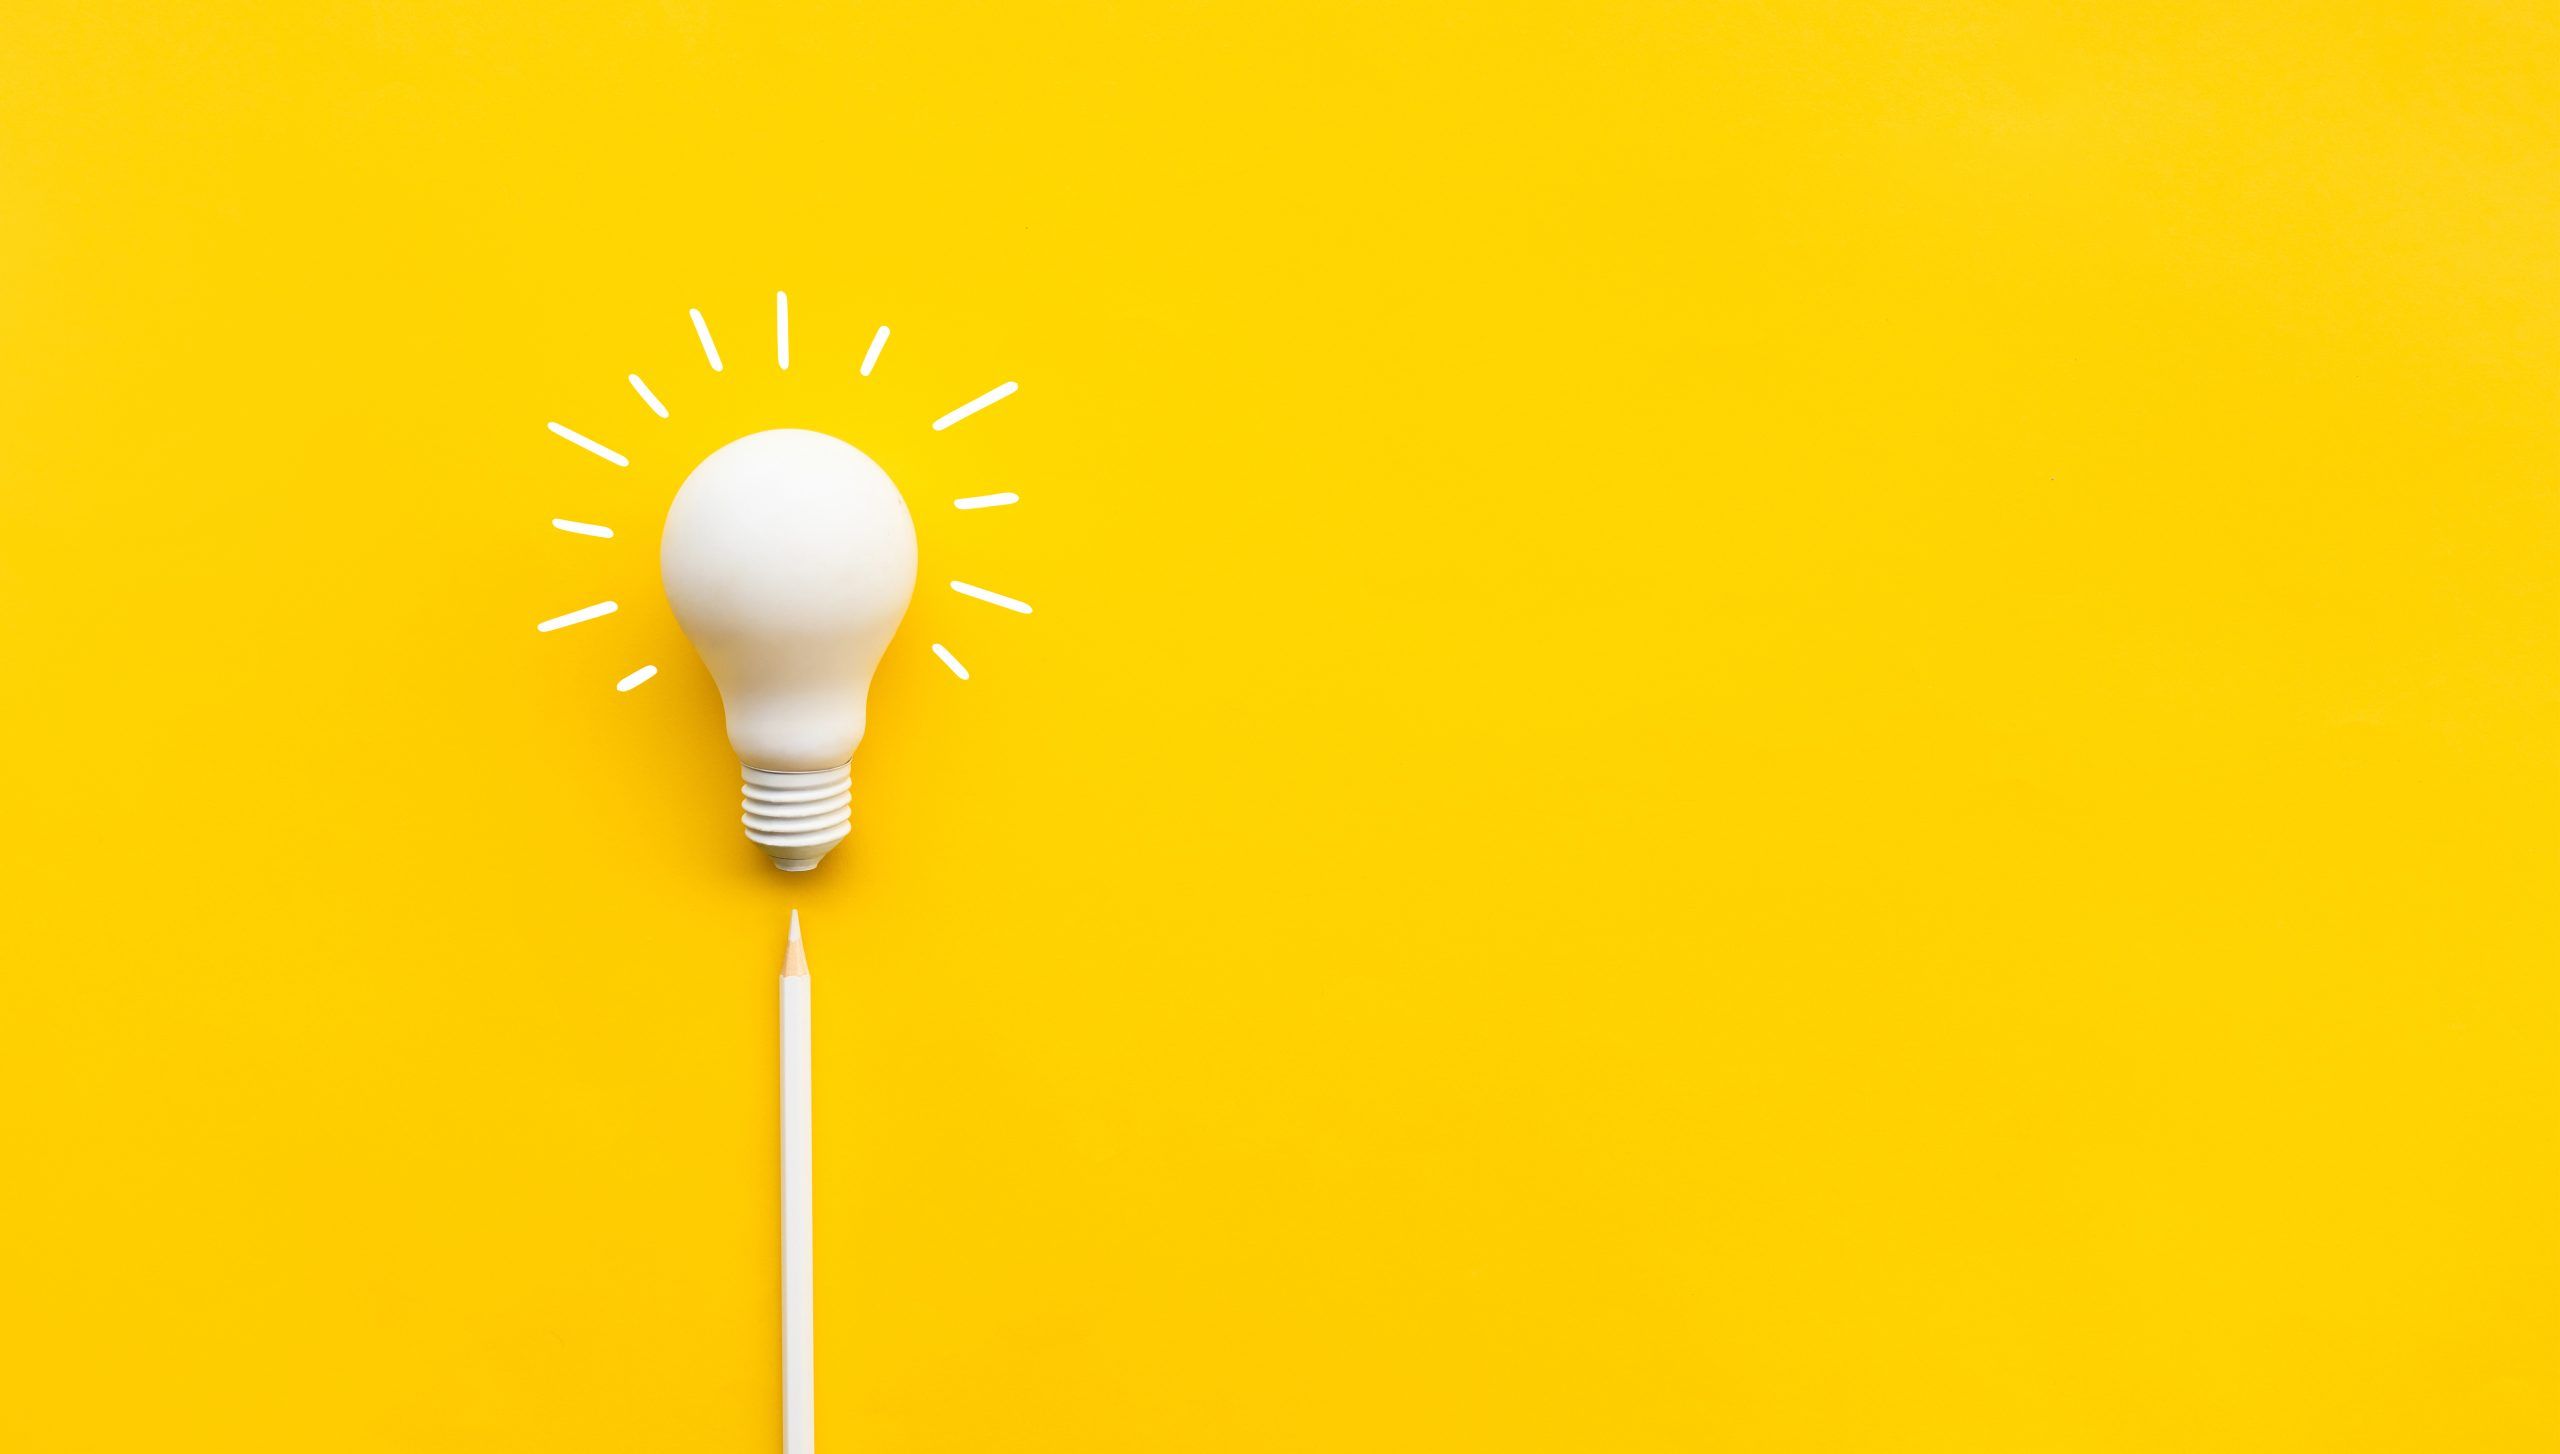 A white lightbulb with lines around it against a yellow background.